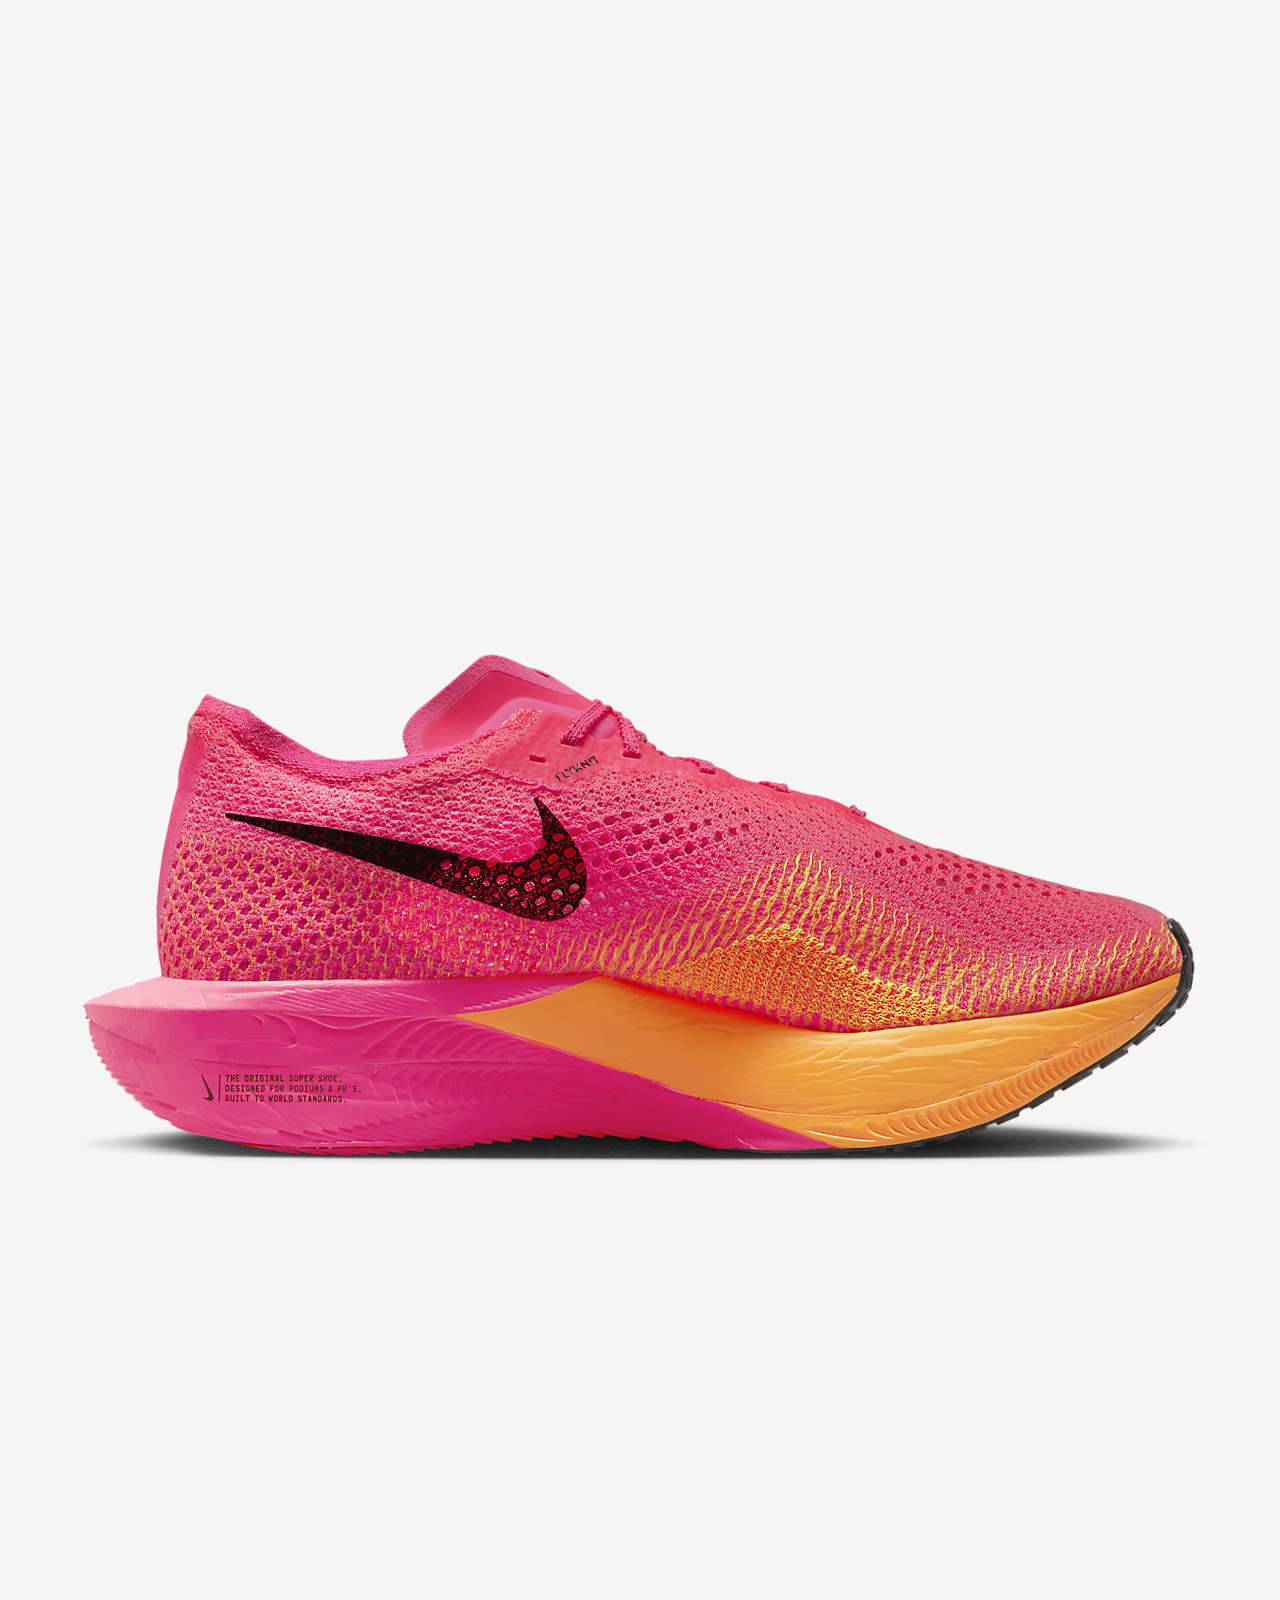 Nike Shoes: Buy Nike Shoes Online for Men & Women Only at Tata CLiQ